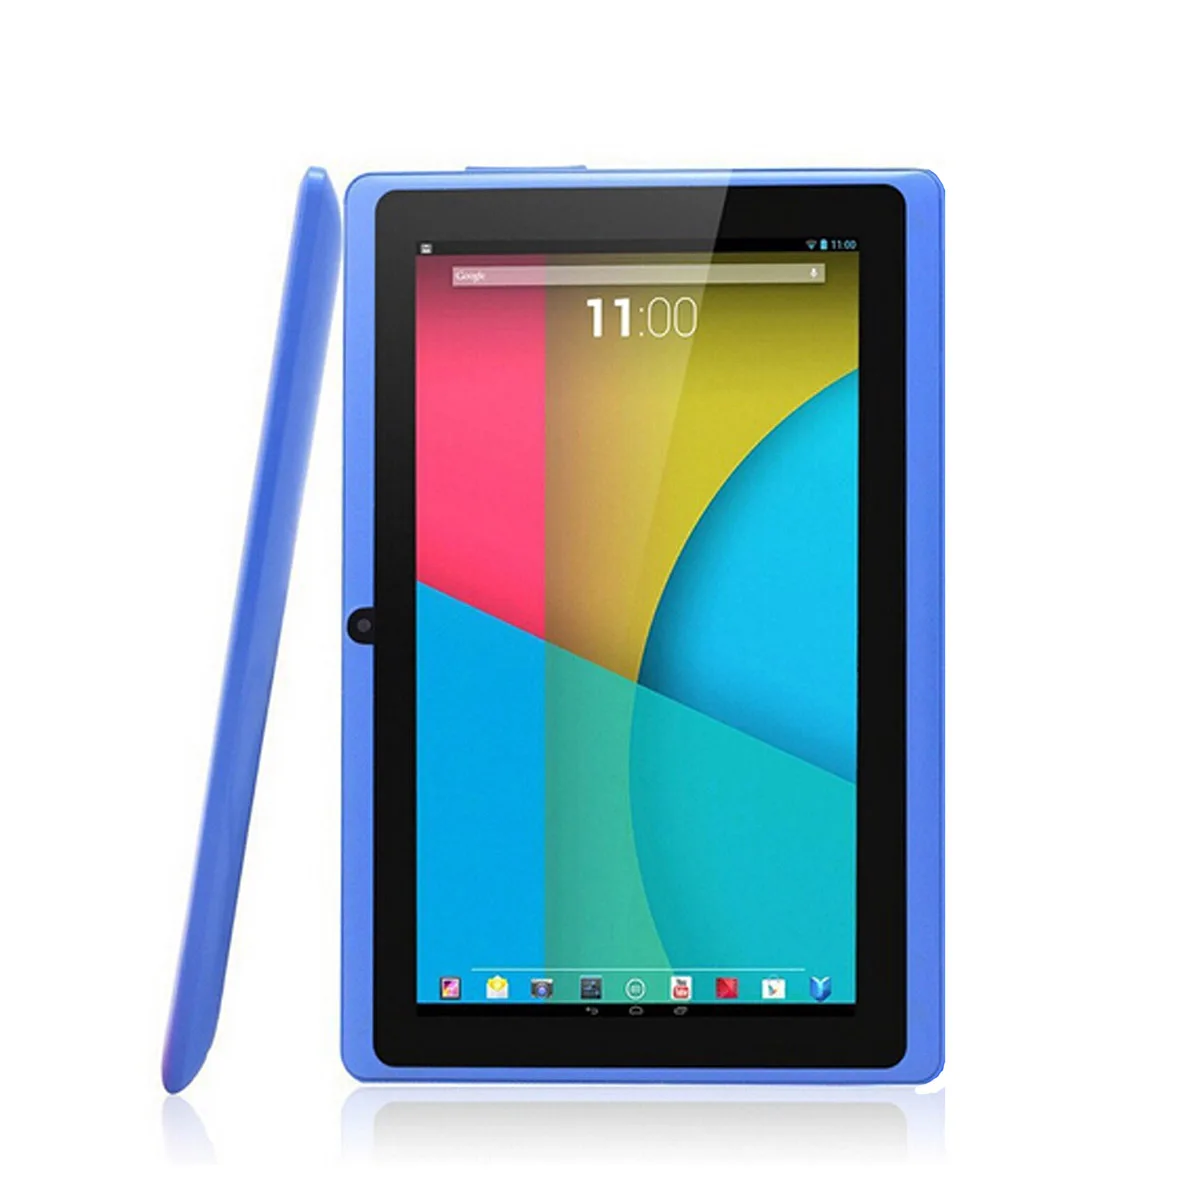 

7 Inch A33 Quad Core Tablet Allwinner Android 4.4 KitKat Capacitive 1.3GHz 512MB RAM 4GB ROM WIFI Dual Camera Flashlight Q88